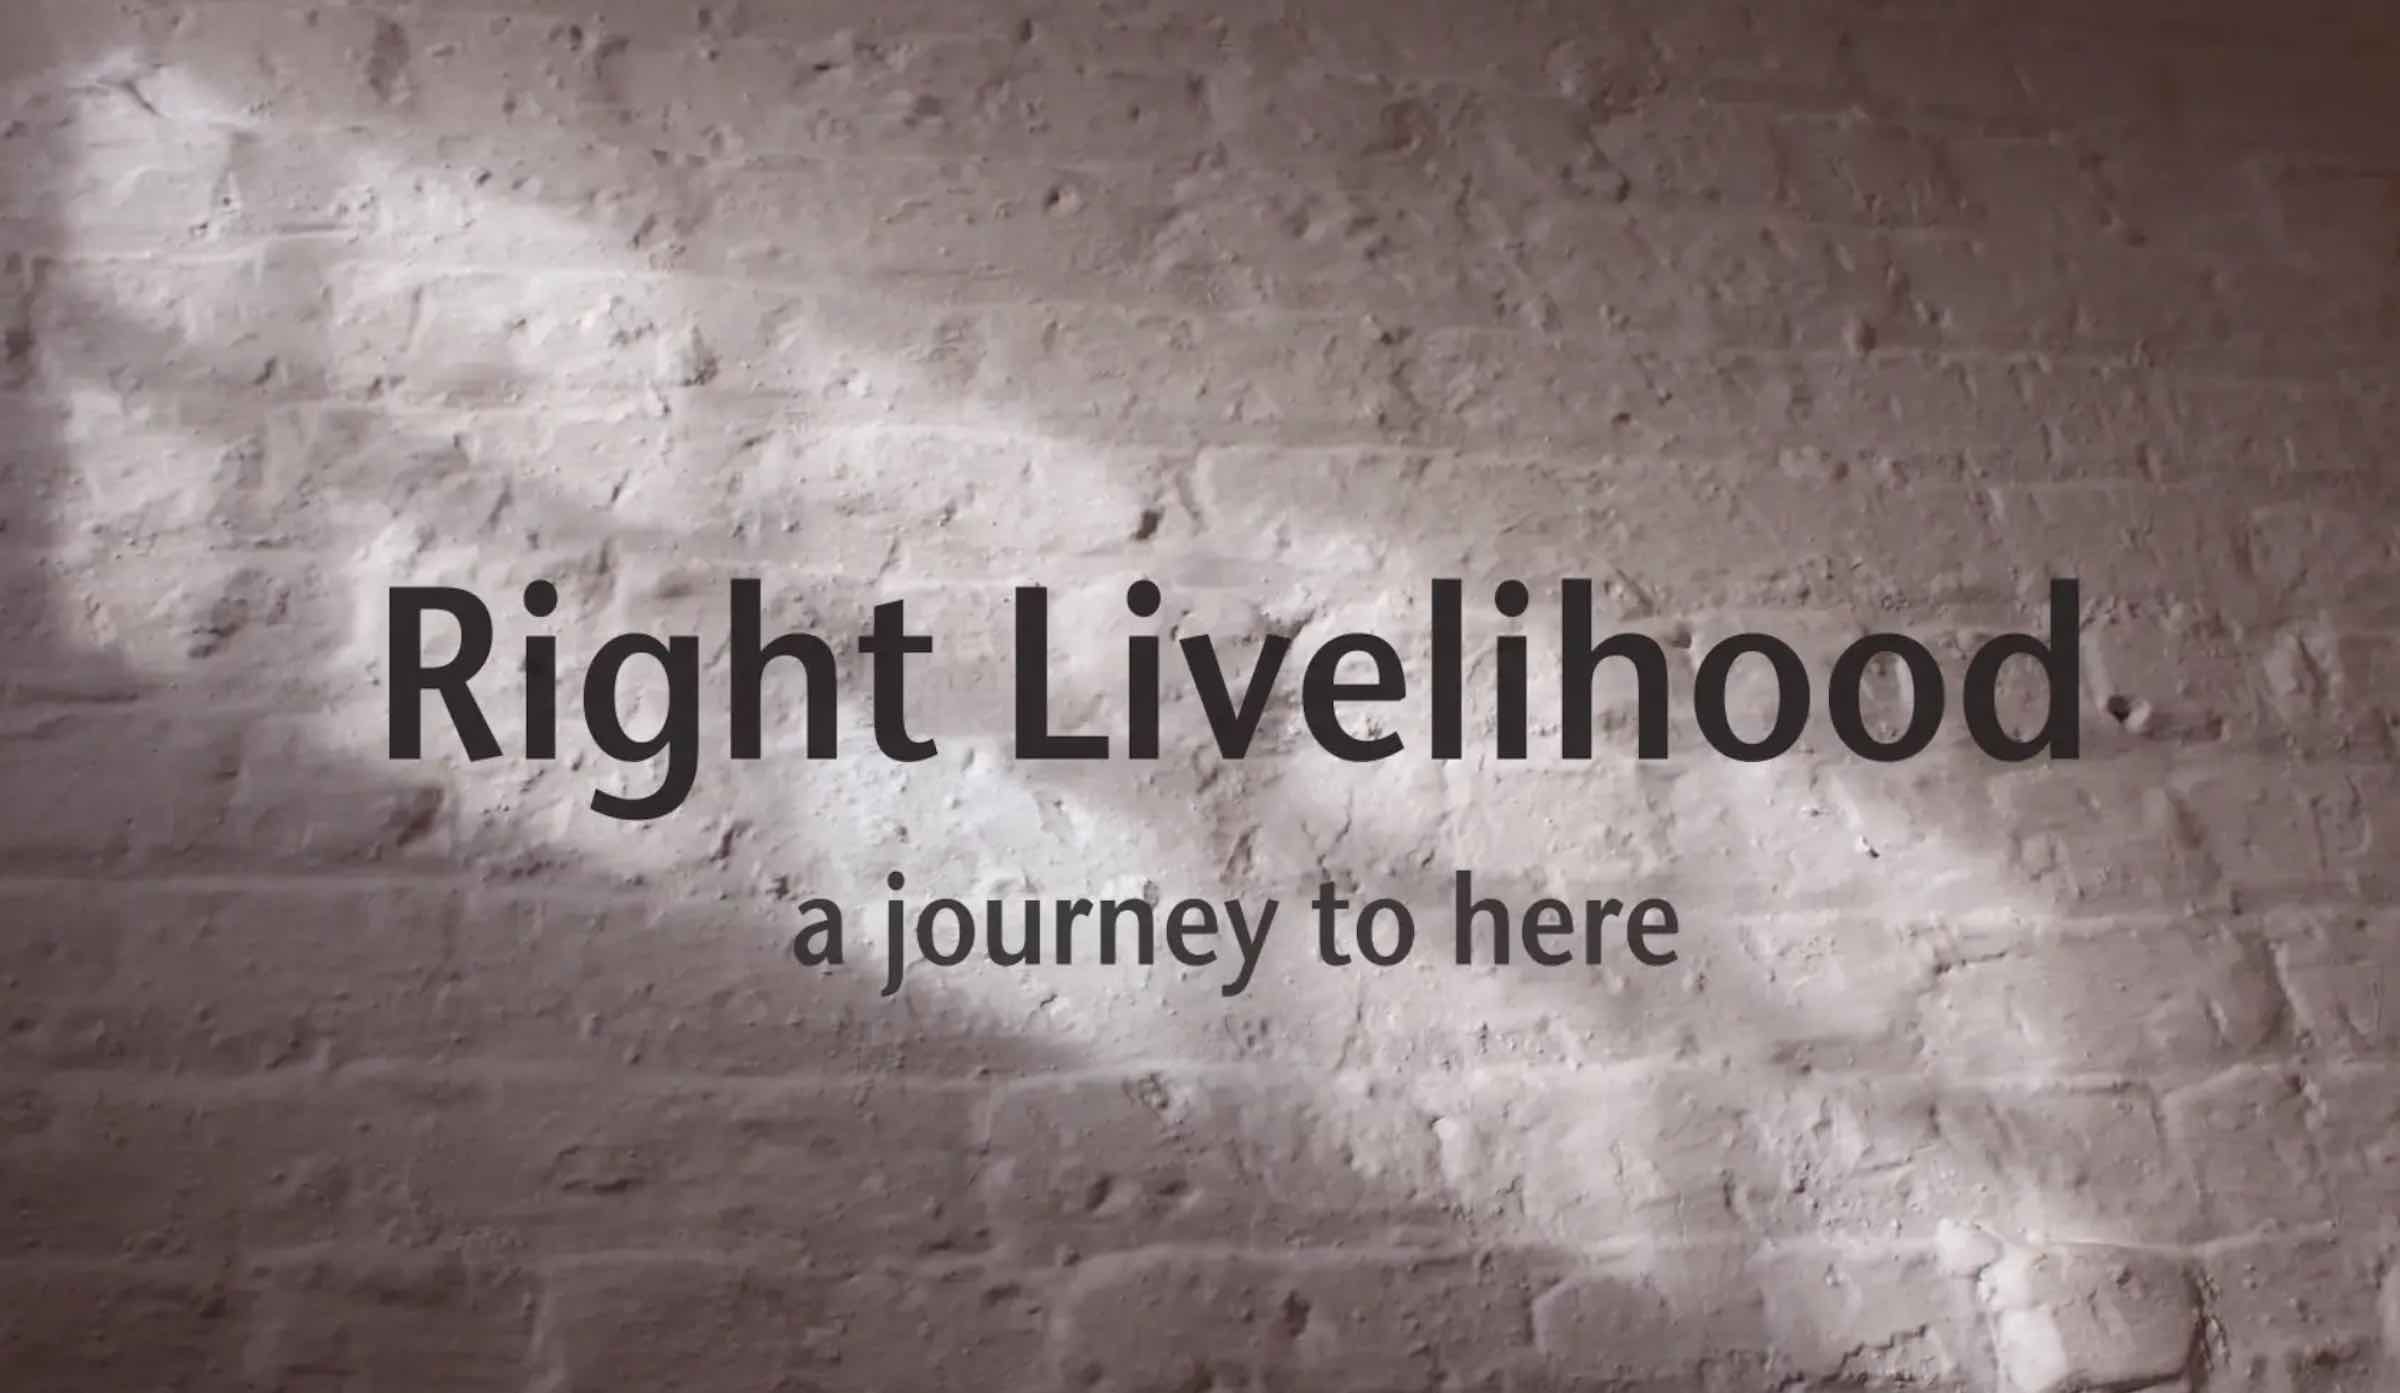 Our indie filmmaker of the day is Tricia Brouk. Her documentary short 'Right Livelihood: A Journey to Here' debuts in LA June 20th - 27th, 2019.